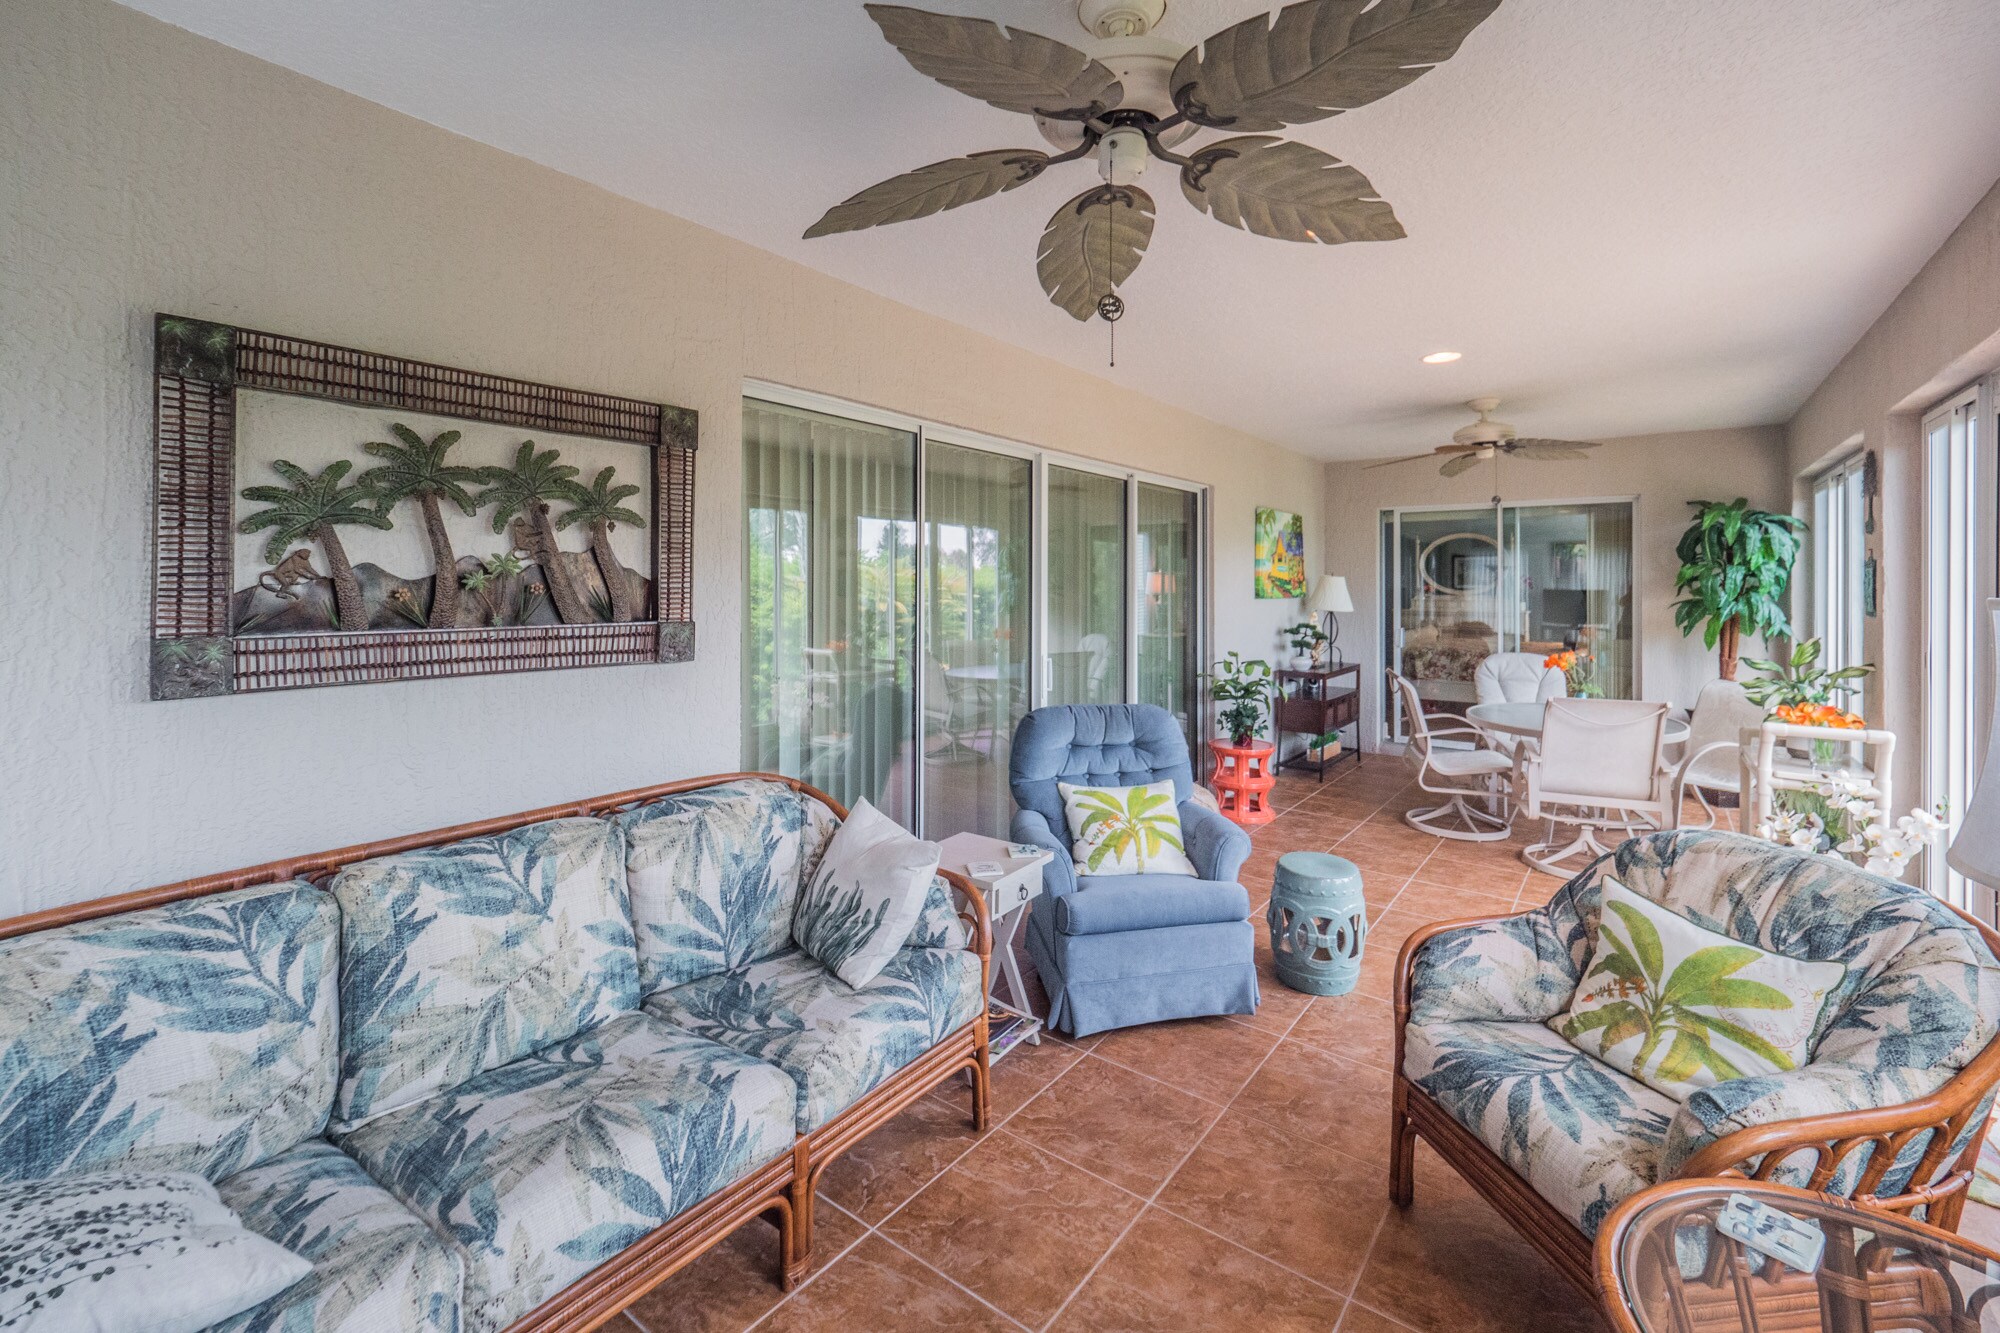 Less than 1 mile (2 Minutes) to Lake Sumter Landing! Includes Golf Cart!